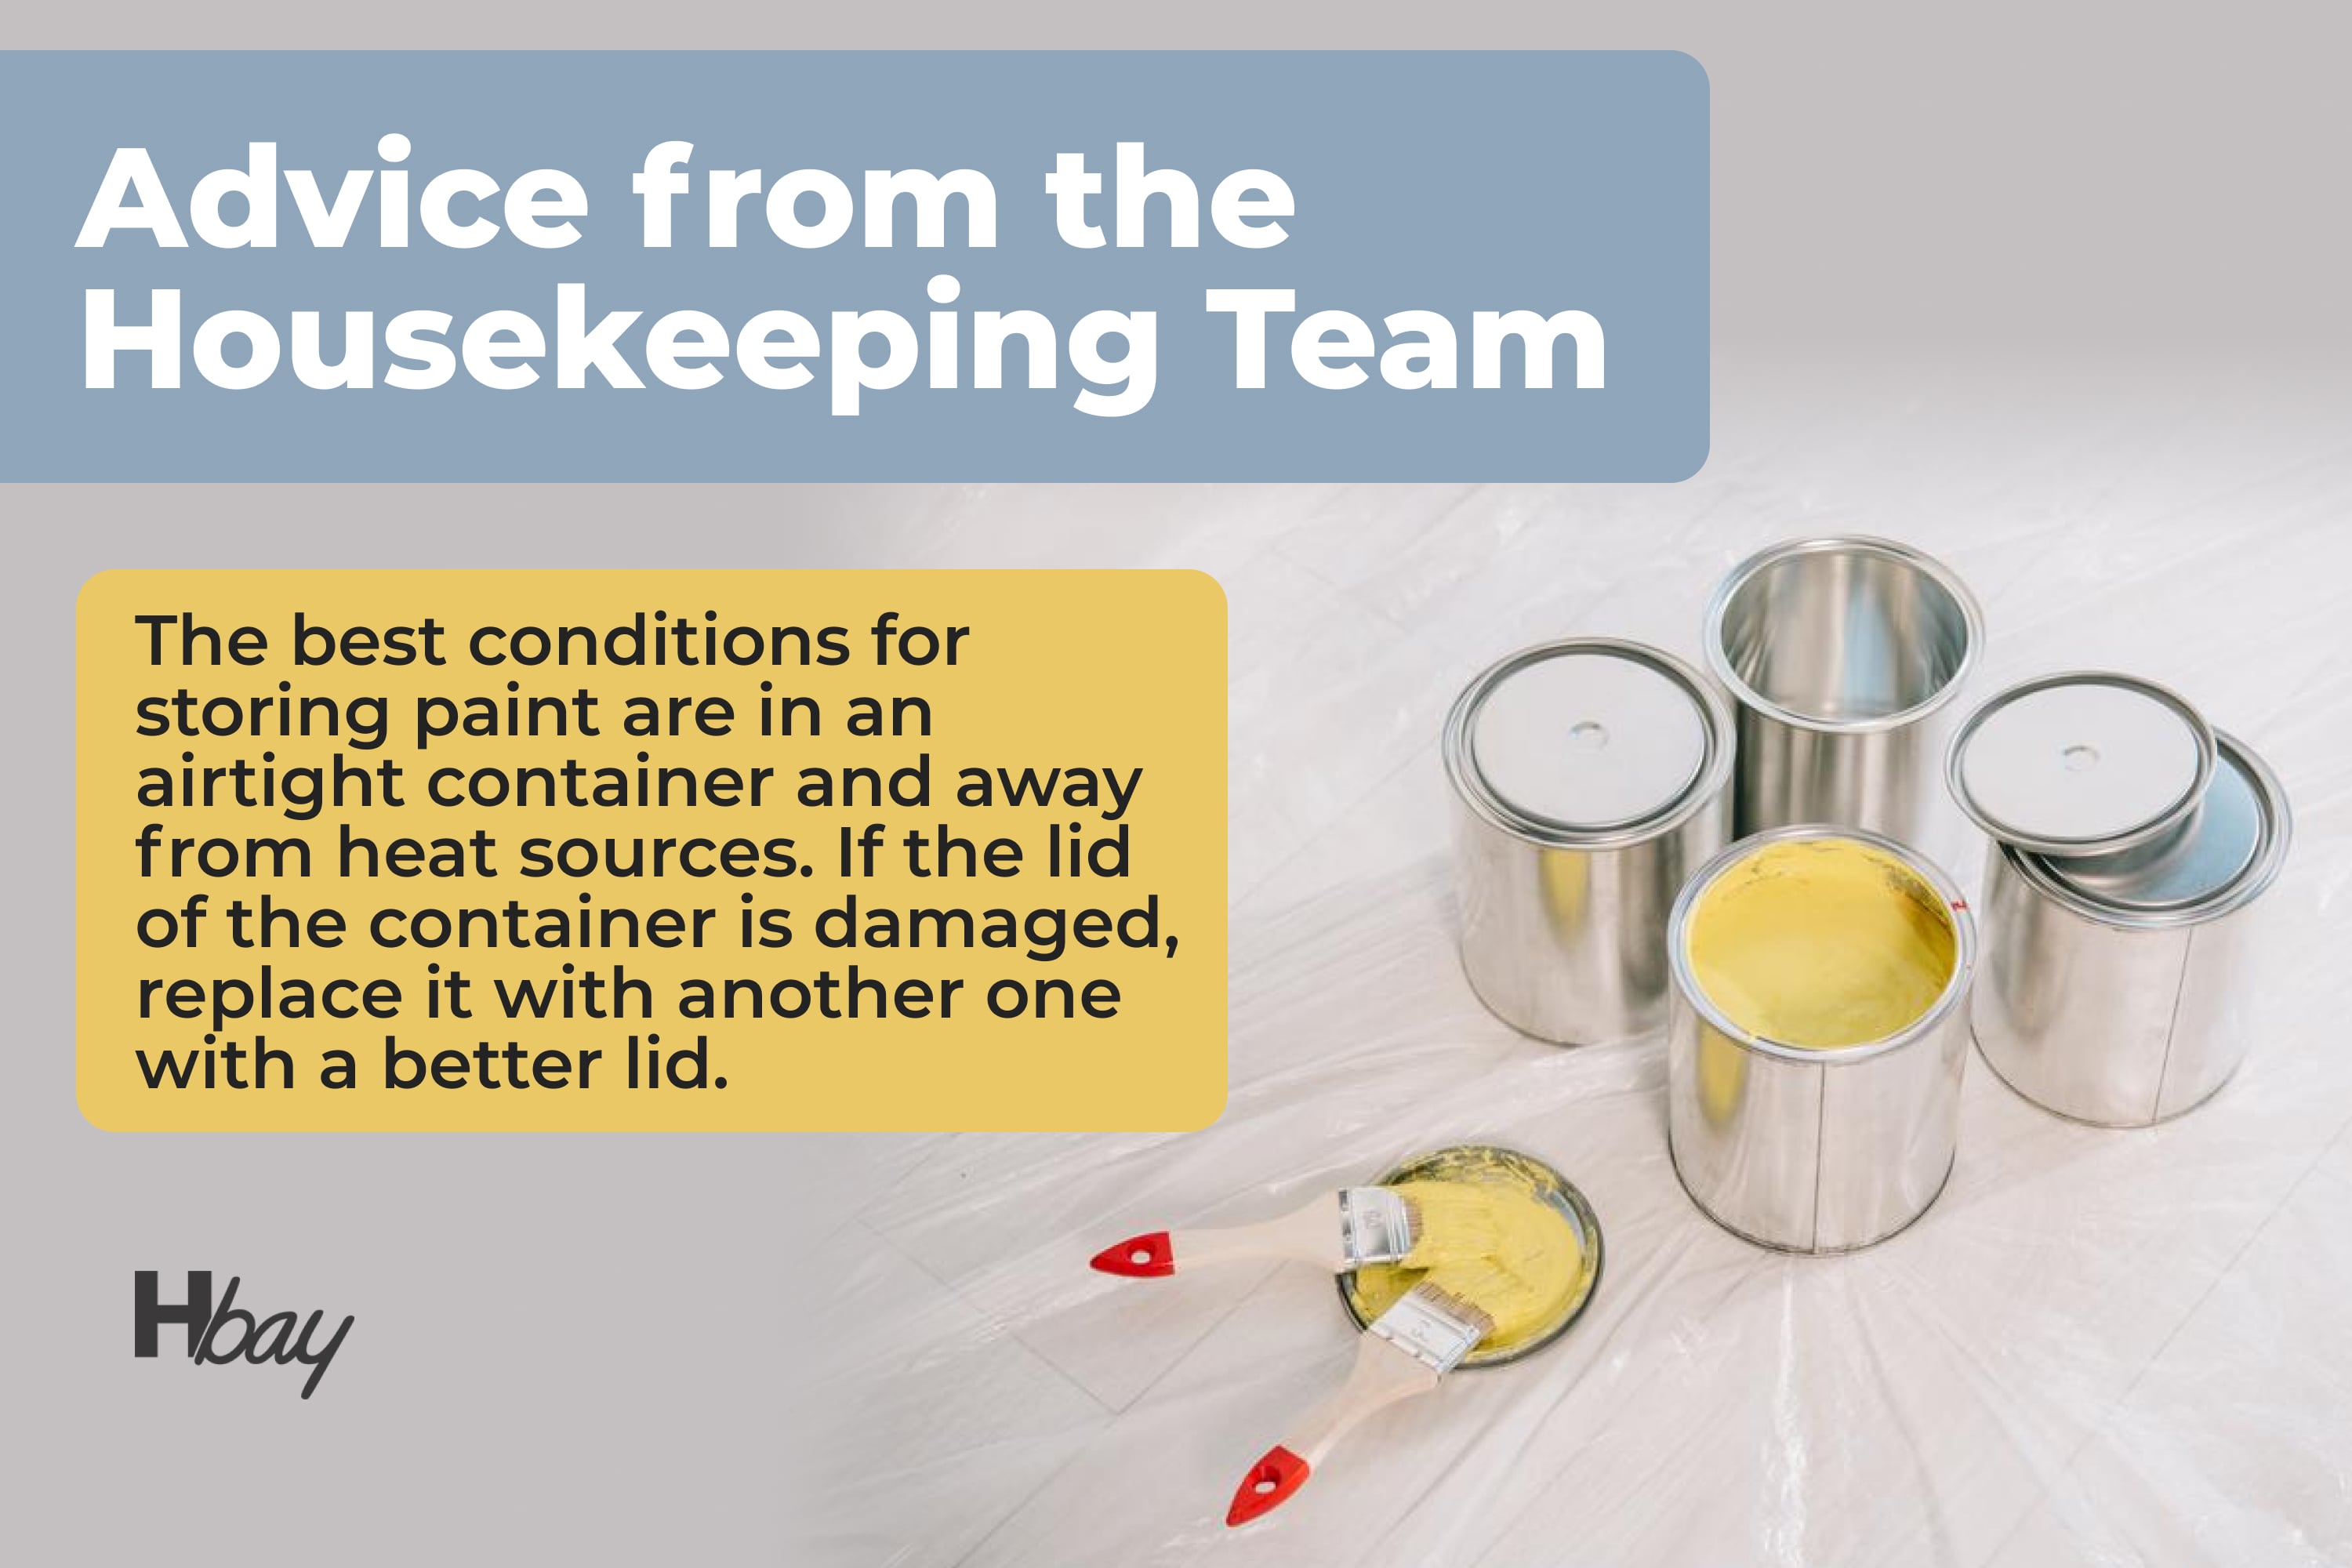 Advice from the Housekeeping Team